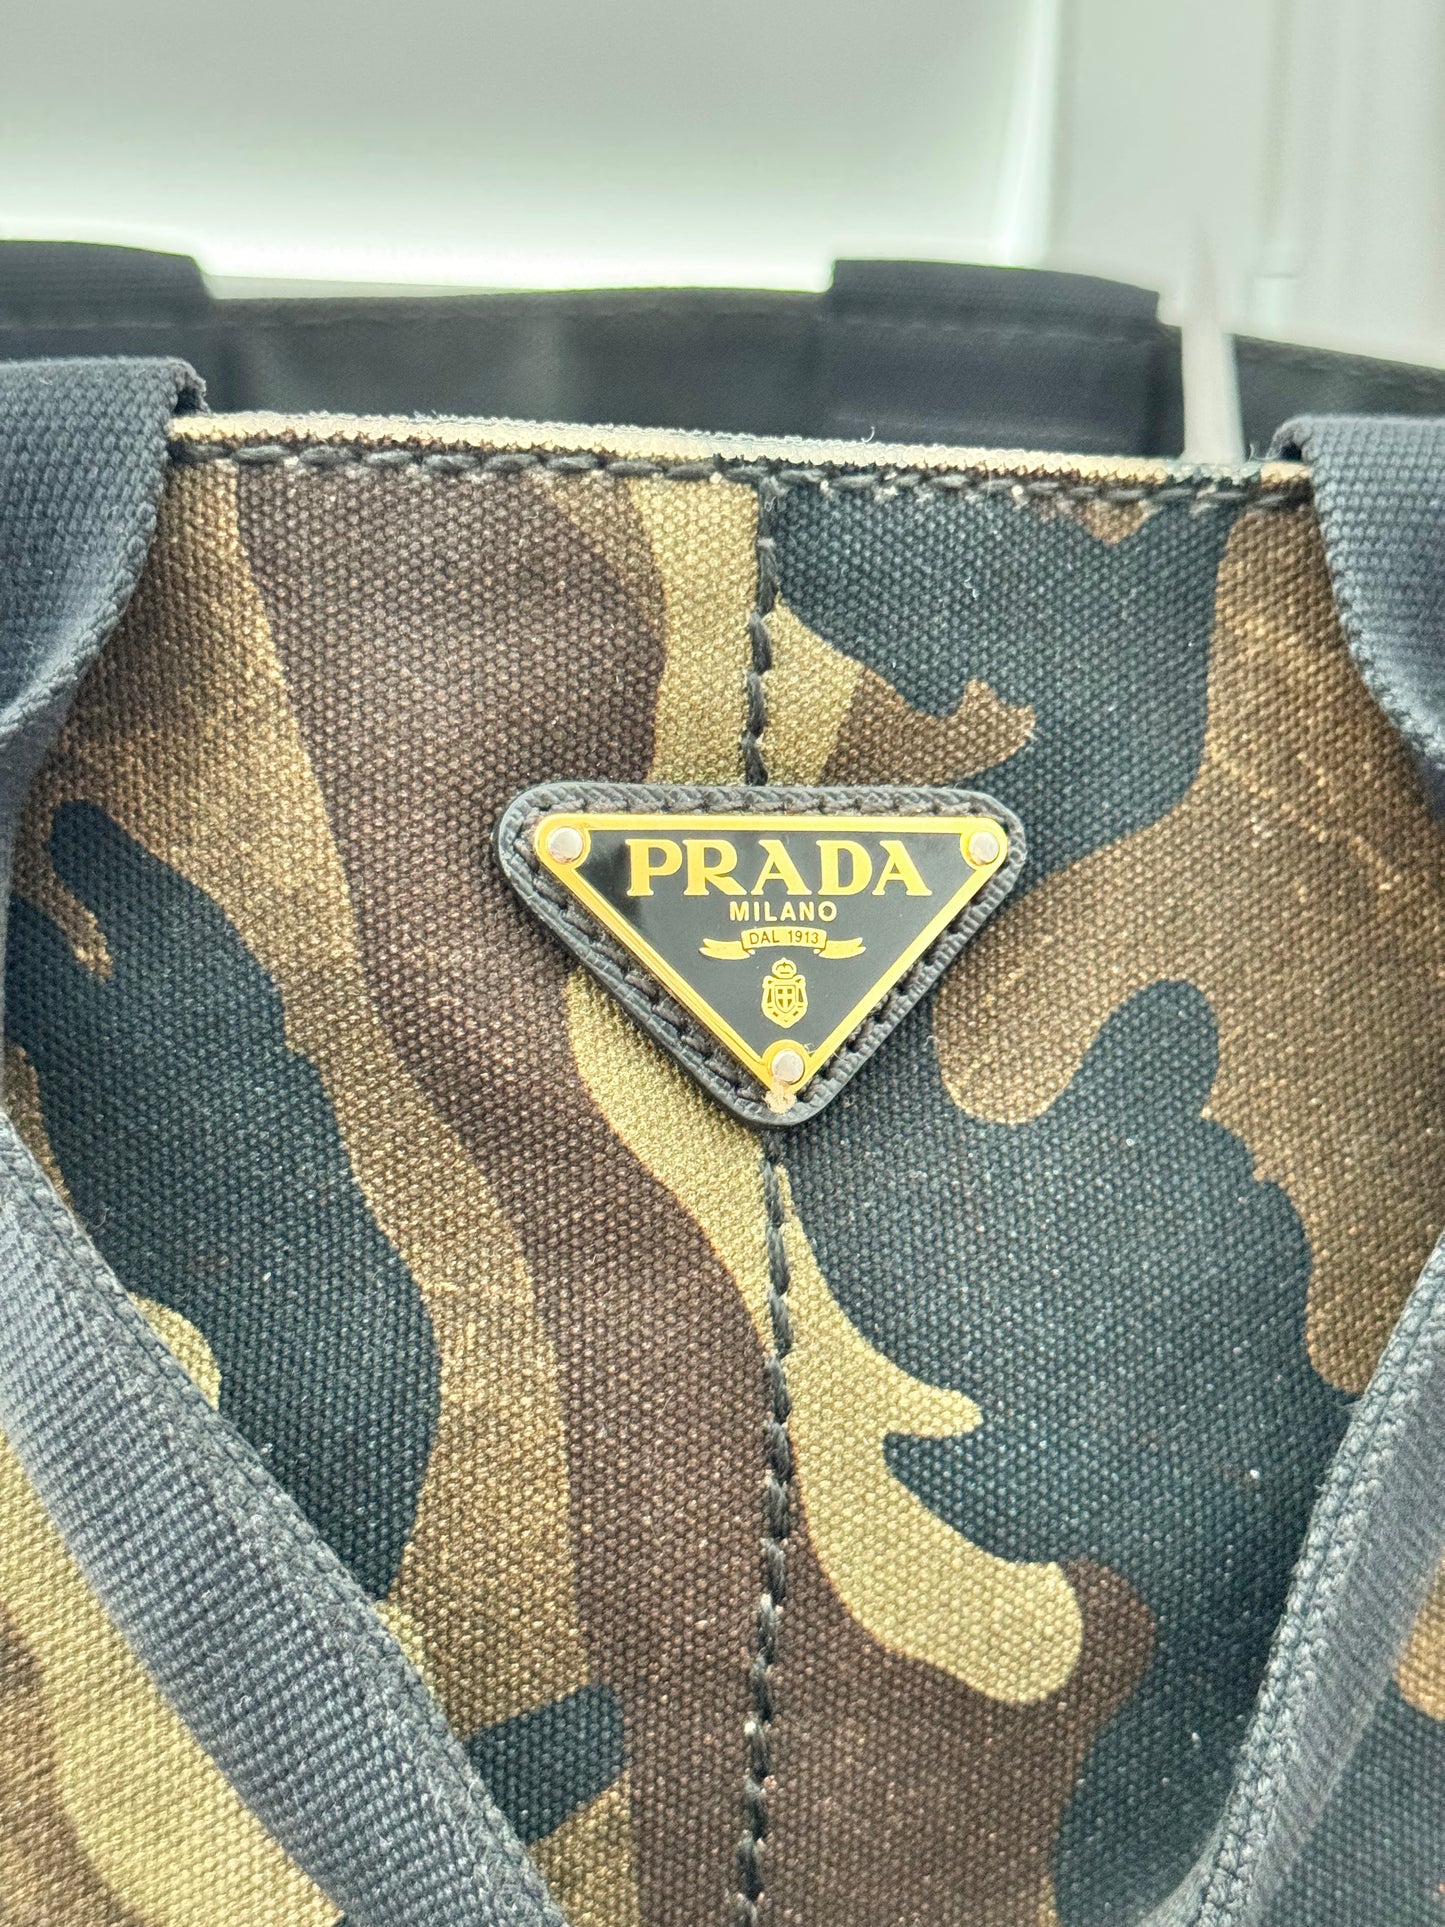 PRADA-Logo Camouflage Canapa Canvas Large Tote-Bag (Pre-Loved)